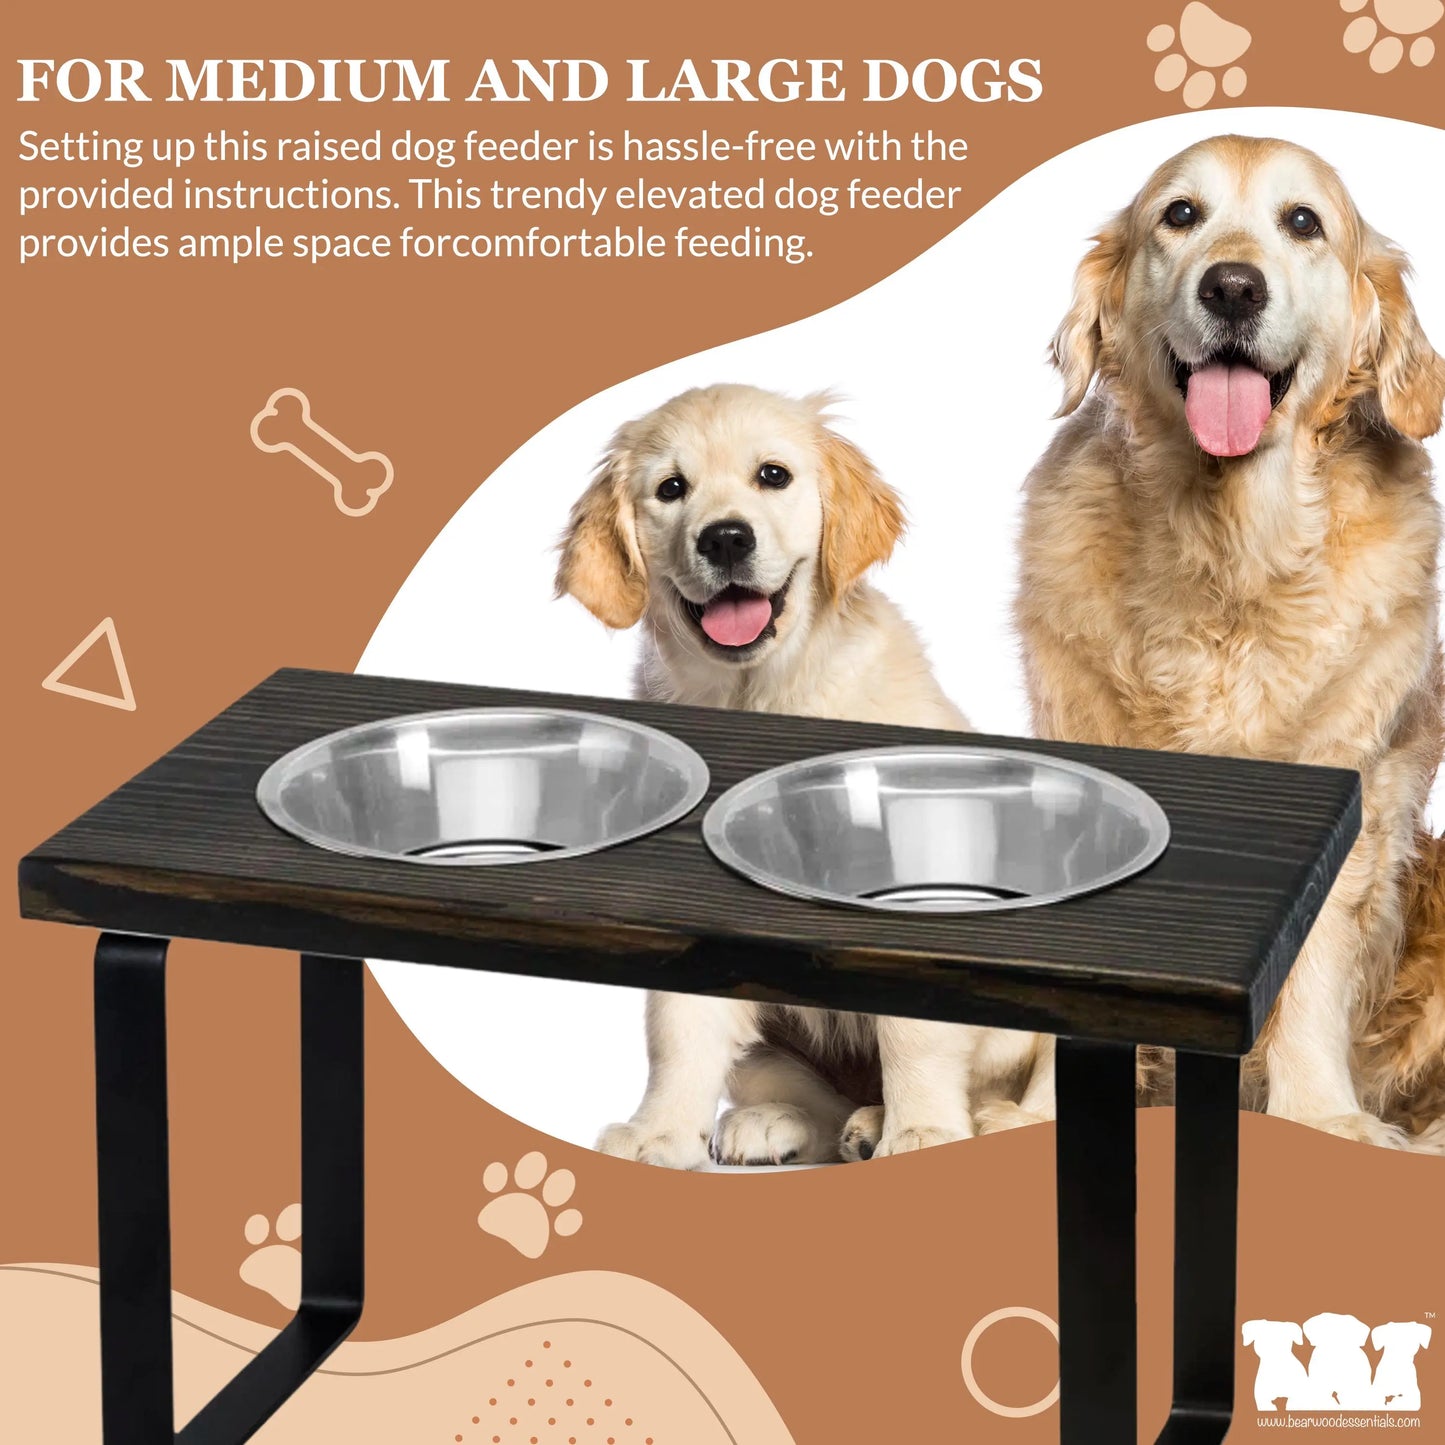 Metal dog bowl feeder. Handmade in two sizes to fit medium or large size dog. BearwoodEssentials-Elevated Pet Feeders